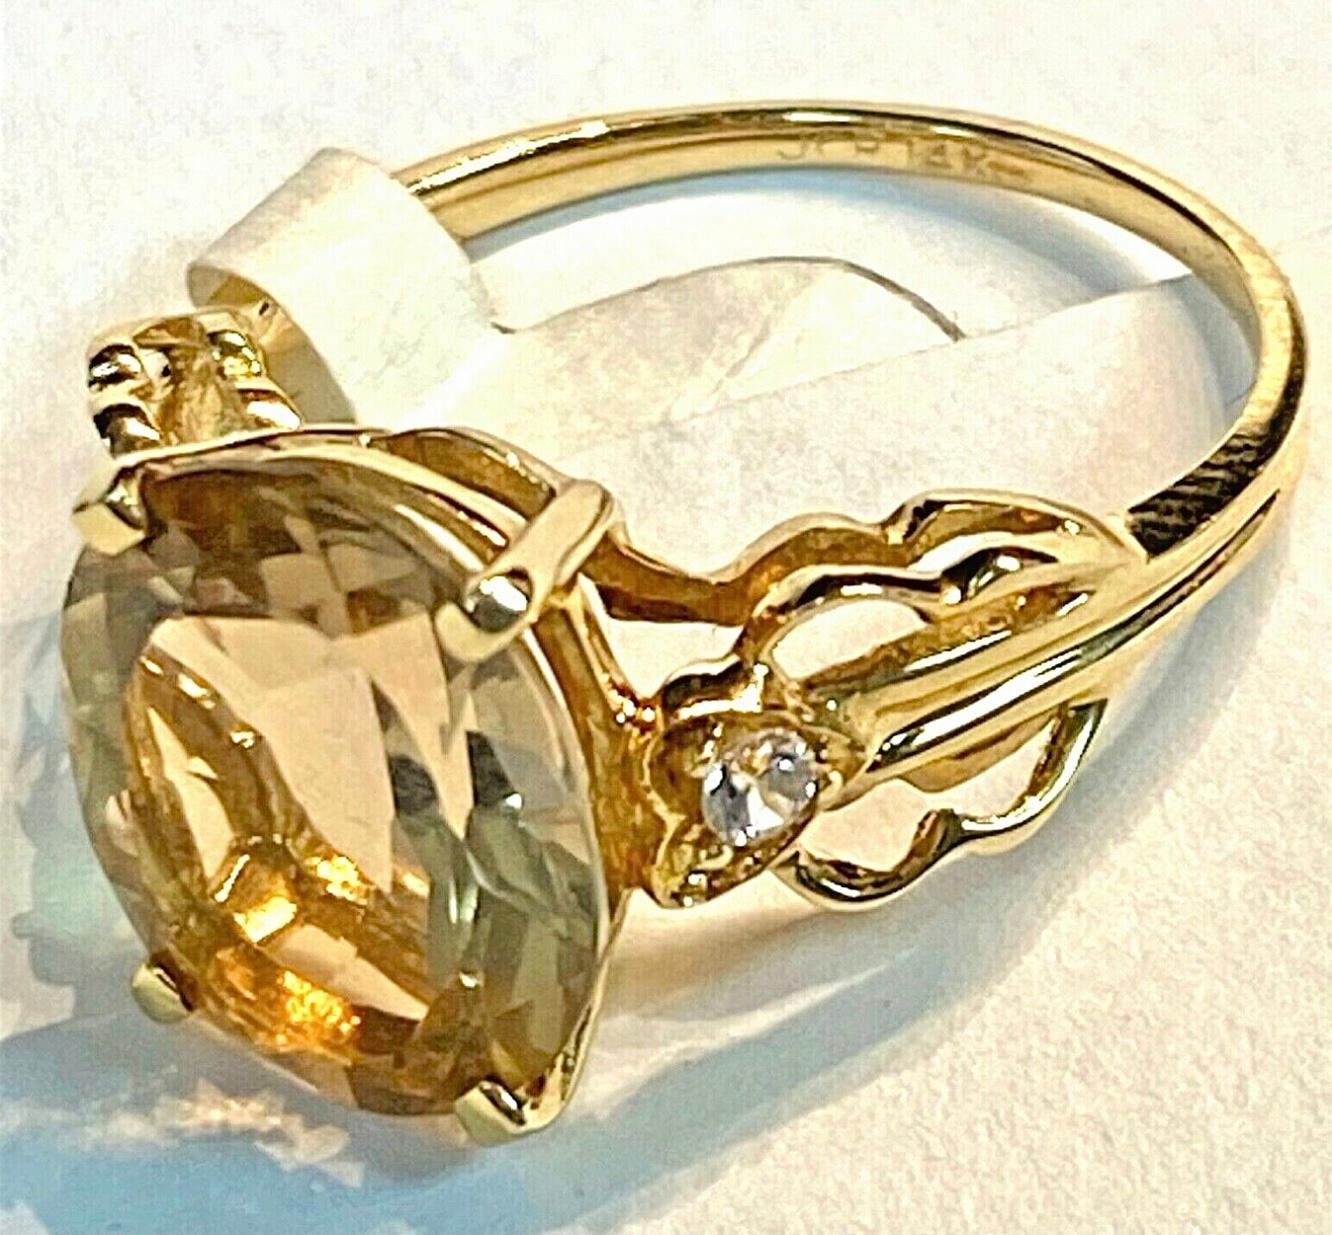 14k yellow smoky yellow Quartz and Diamond, 3.23 Grams TW. The dimensions are approximately 12 mm x 8mm. Approximately 3 carats. Marked 14k. Approximate size 7.0.
